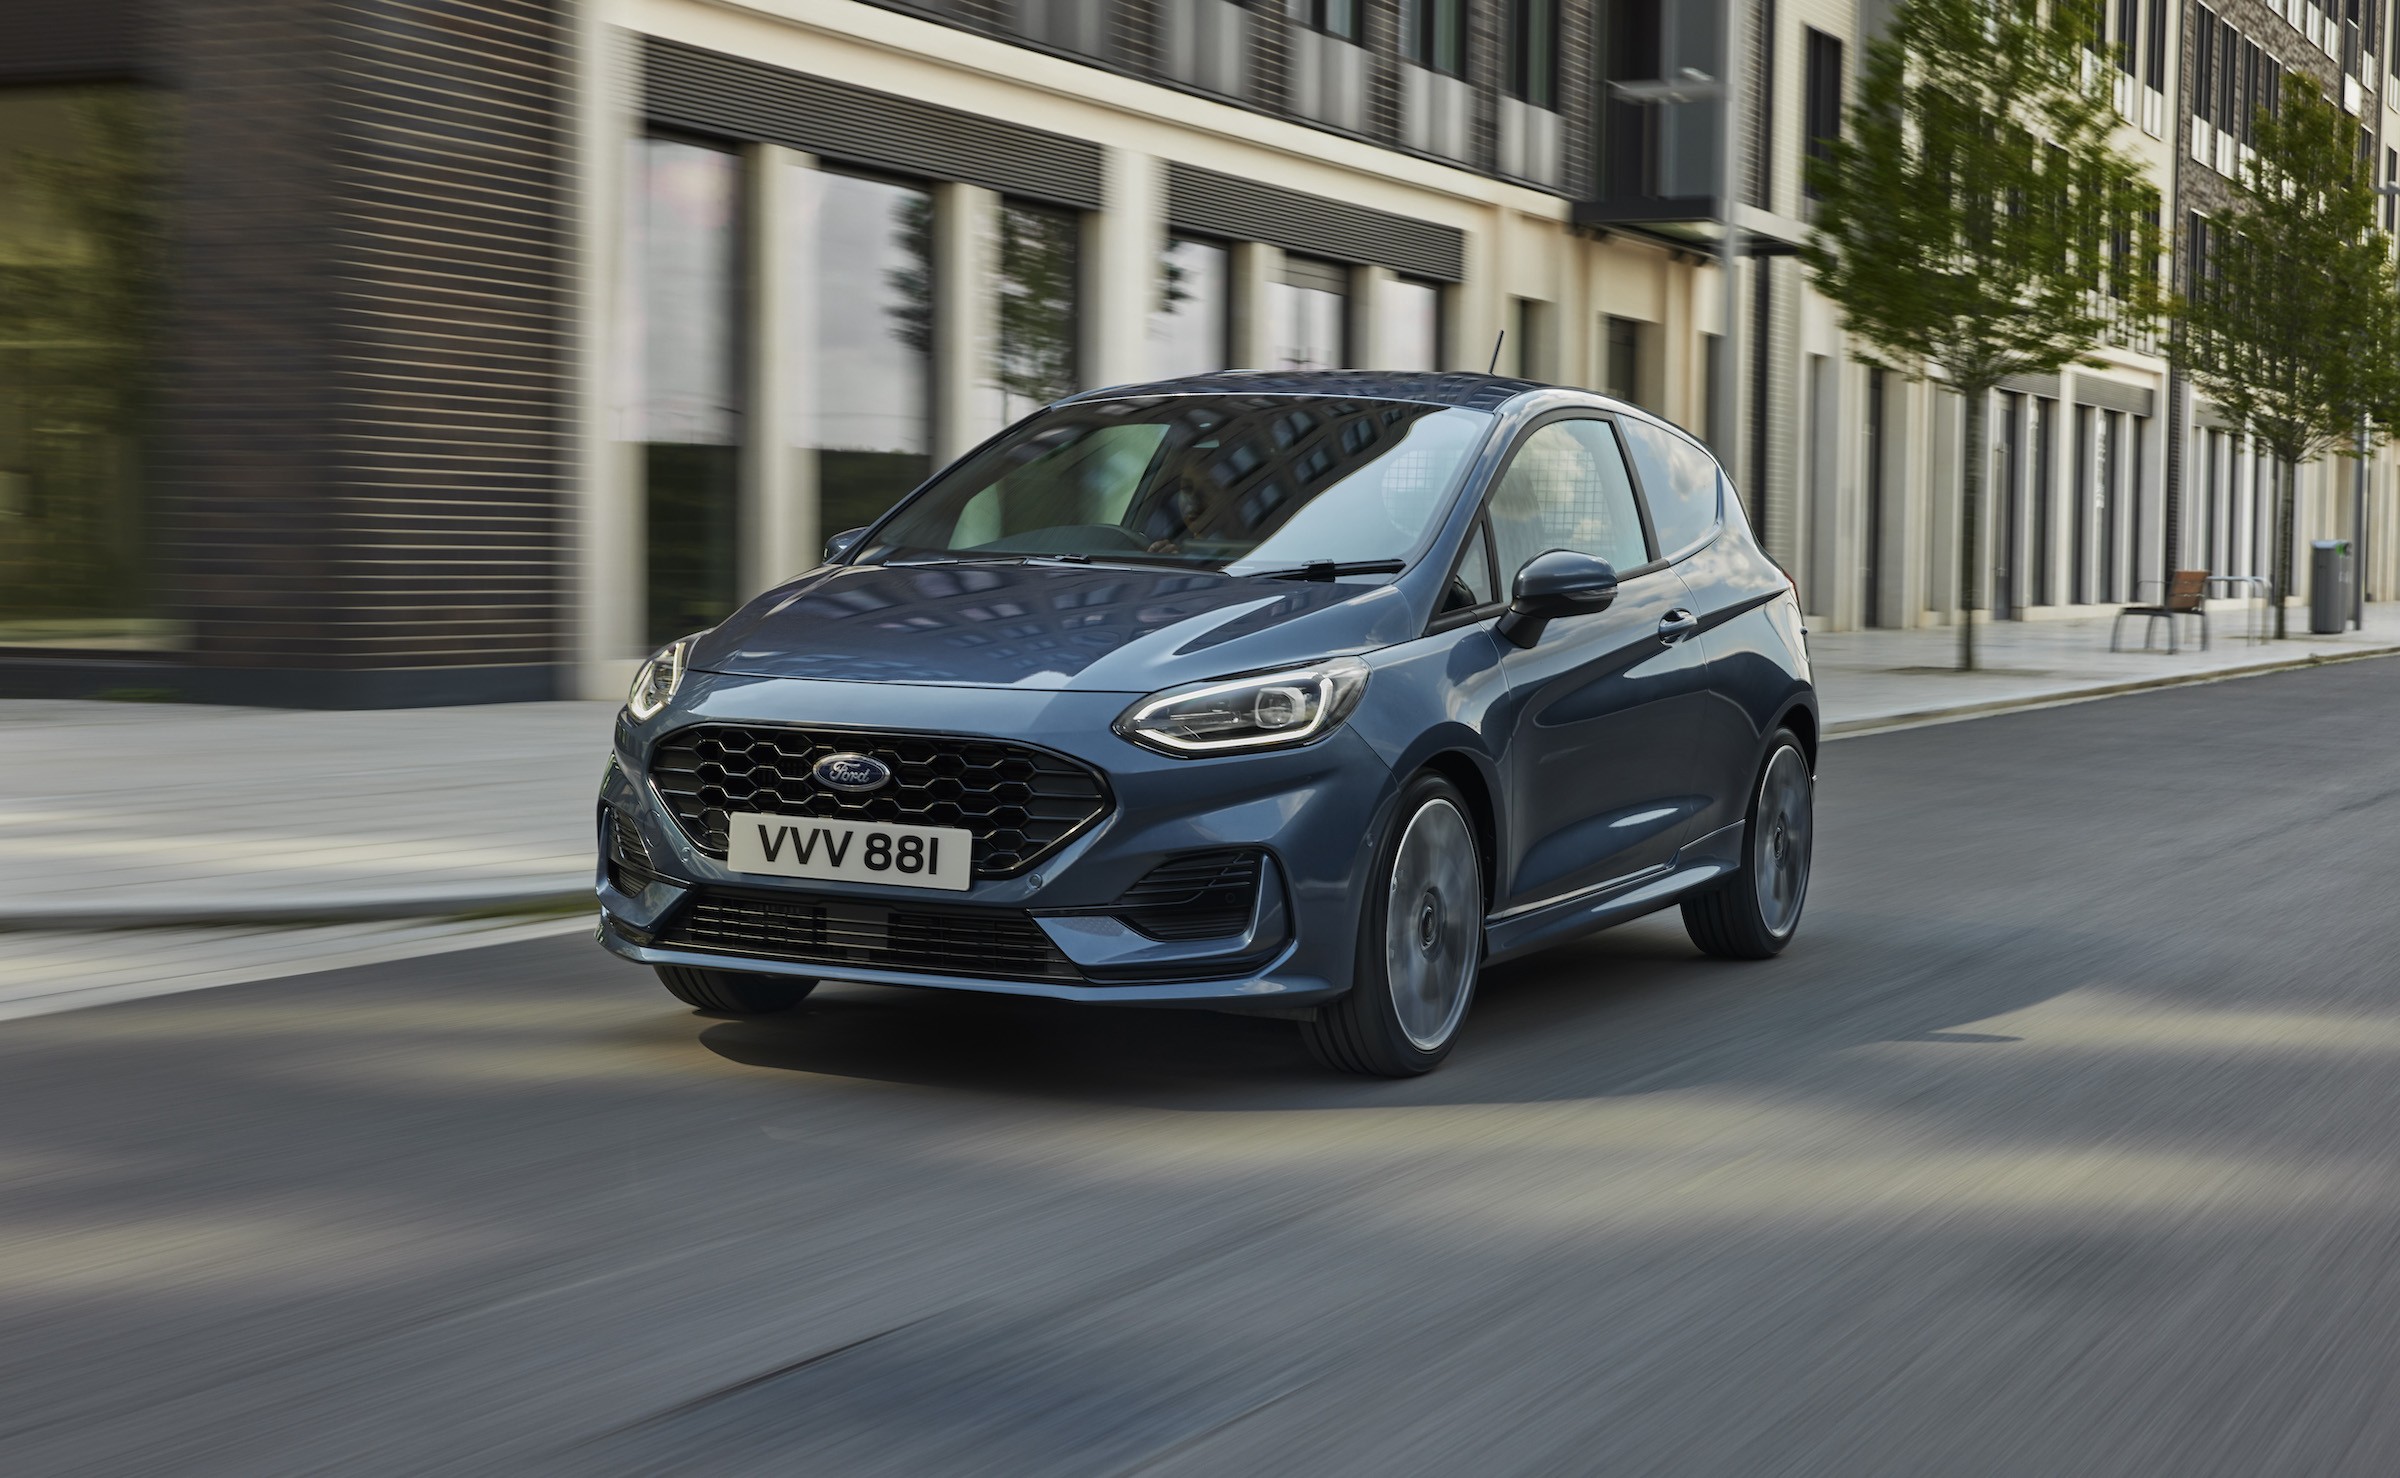 Ford Fiesta To Be Axed Globally As Carmaker Shifts Focus To EVs - ZigWheels